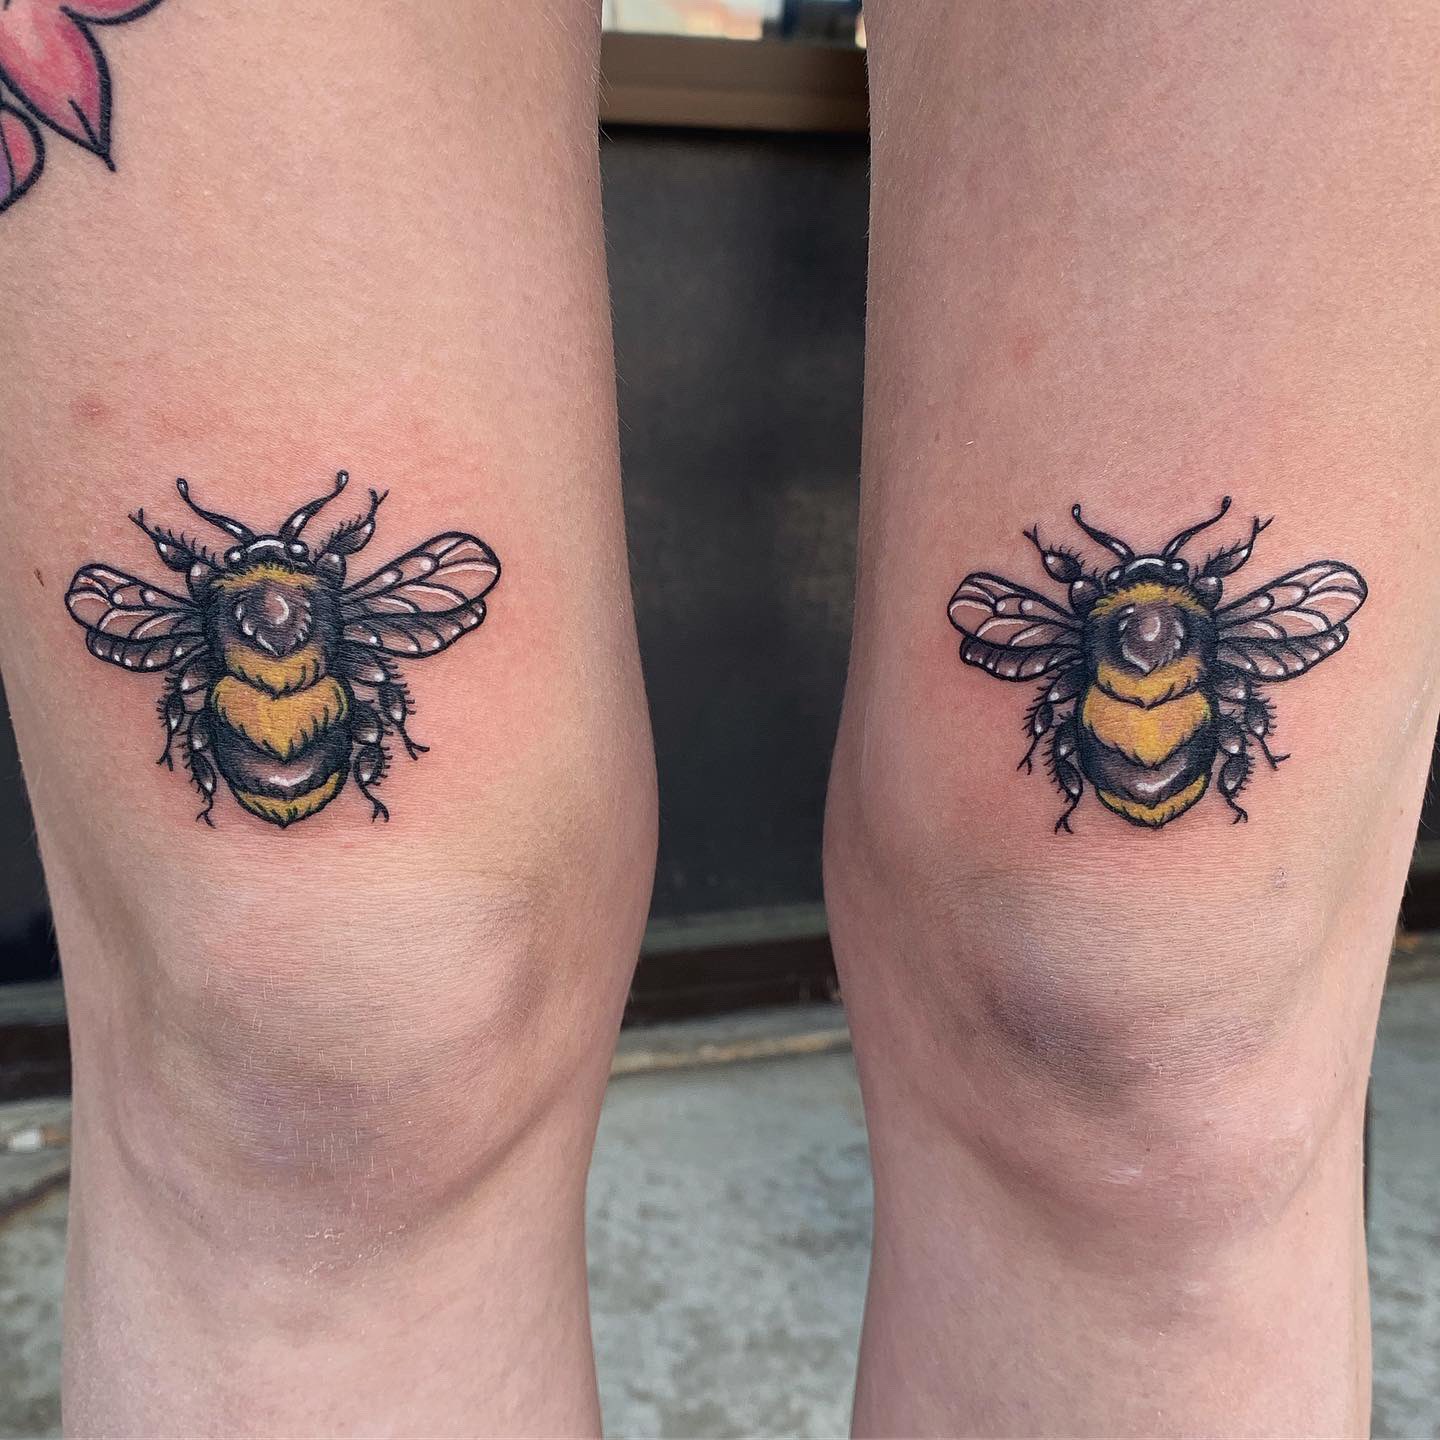 Northside Tattooz on Twitter Healed knee tattoo by Dave  Send Dave a DM  on instagram to book in northsidetattooz Newcastle newcastletattoo  tattoo tattoos tattooed traditionaltattoo kneetattoo healed  httpstco2Gx4BW6gJ0  Twitter